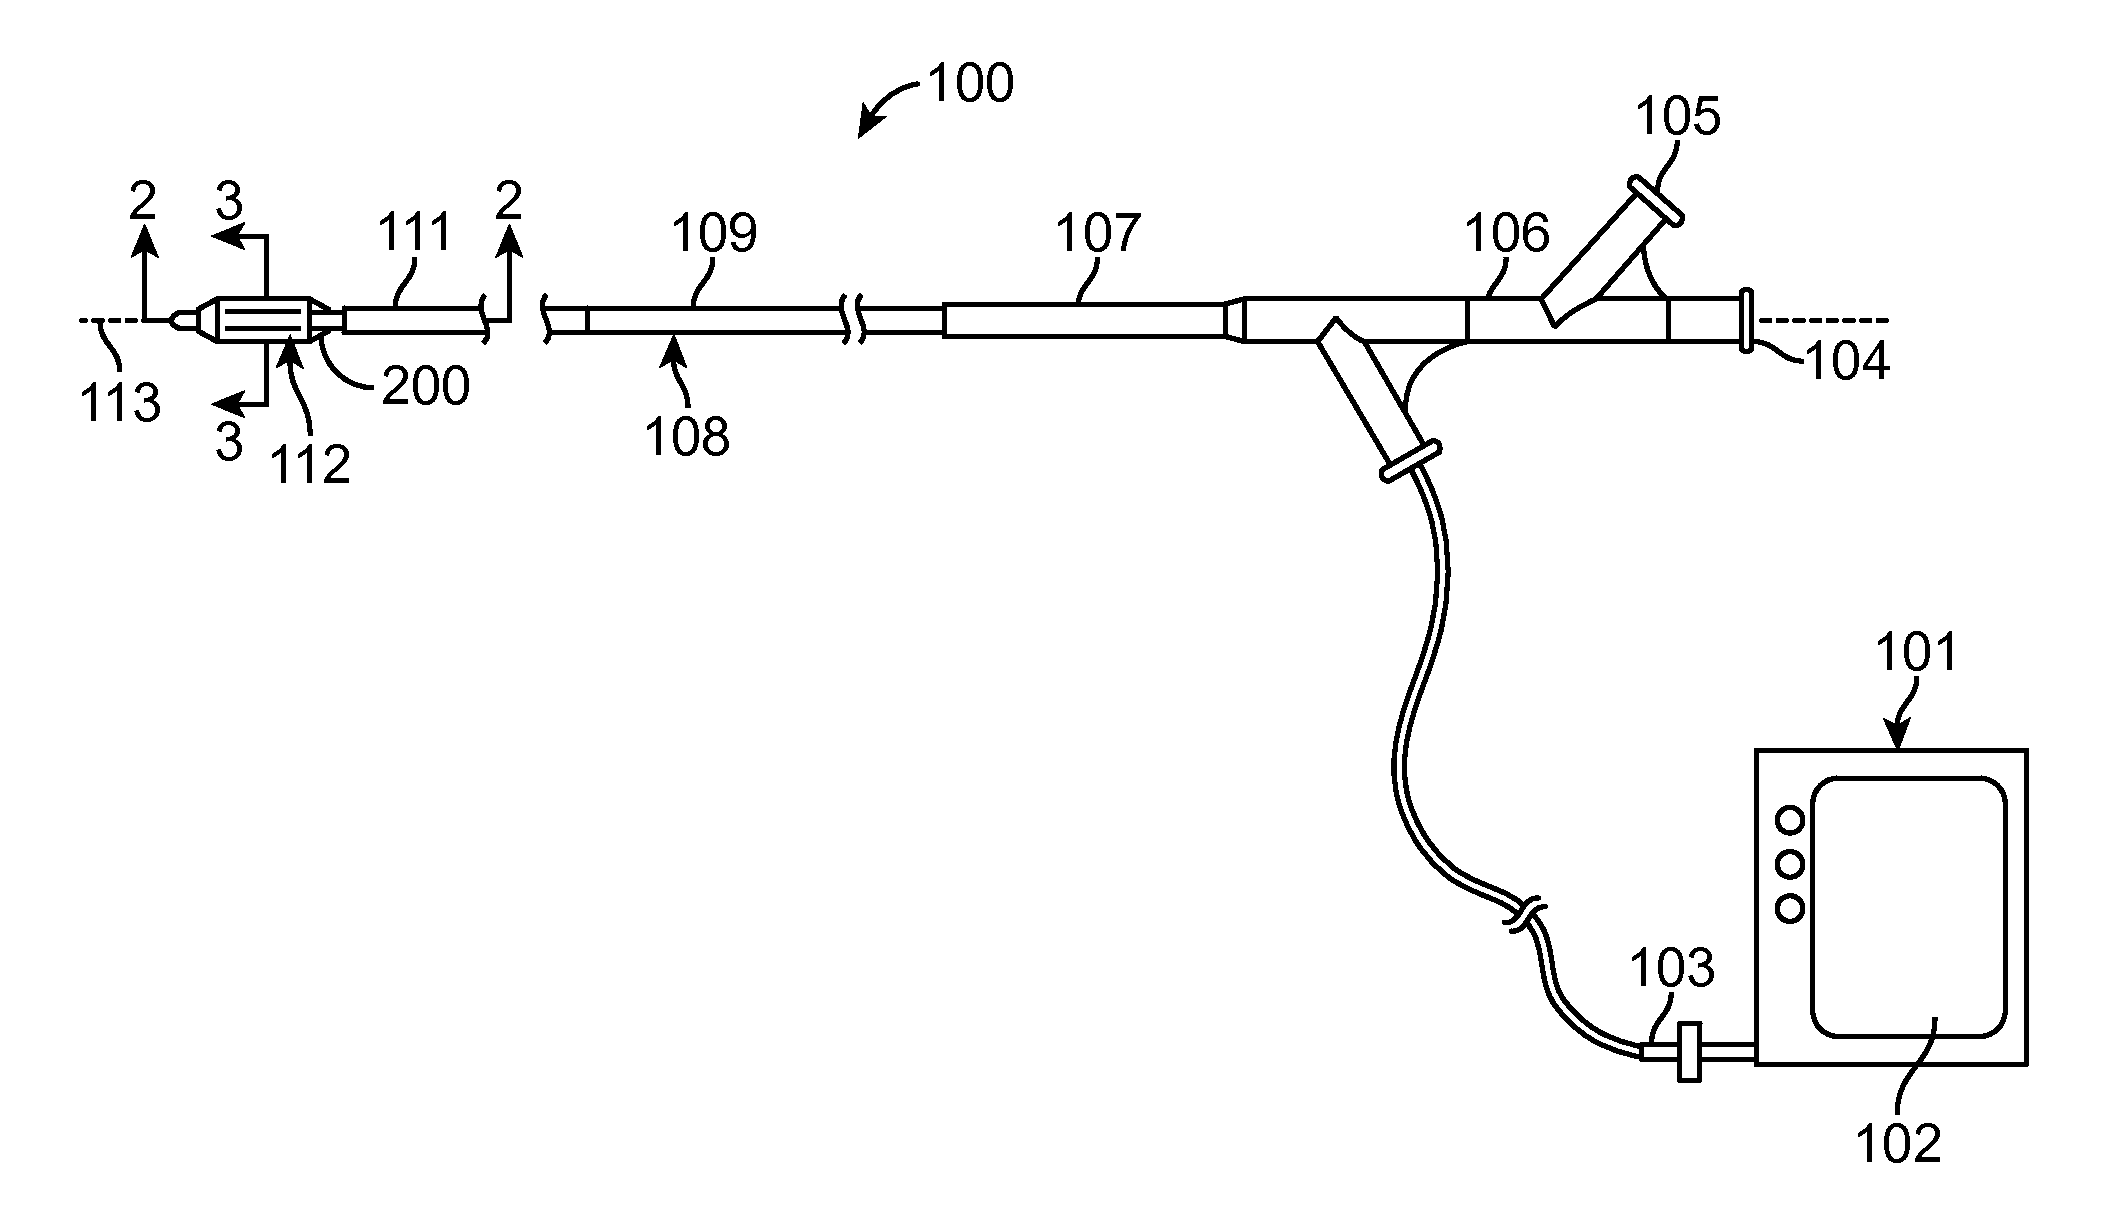 Power generating and control apparatus for the treatment of tissue